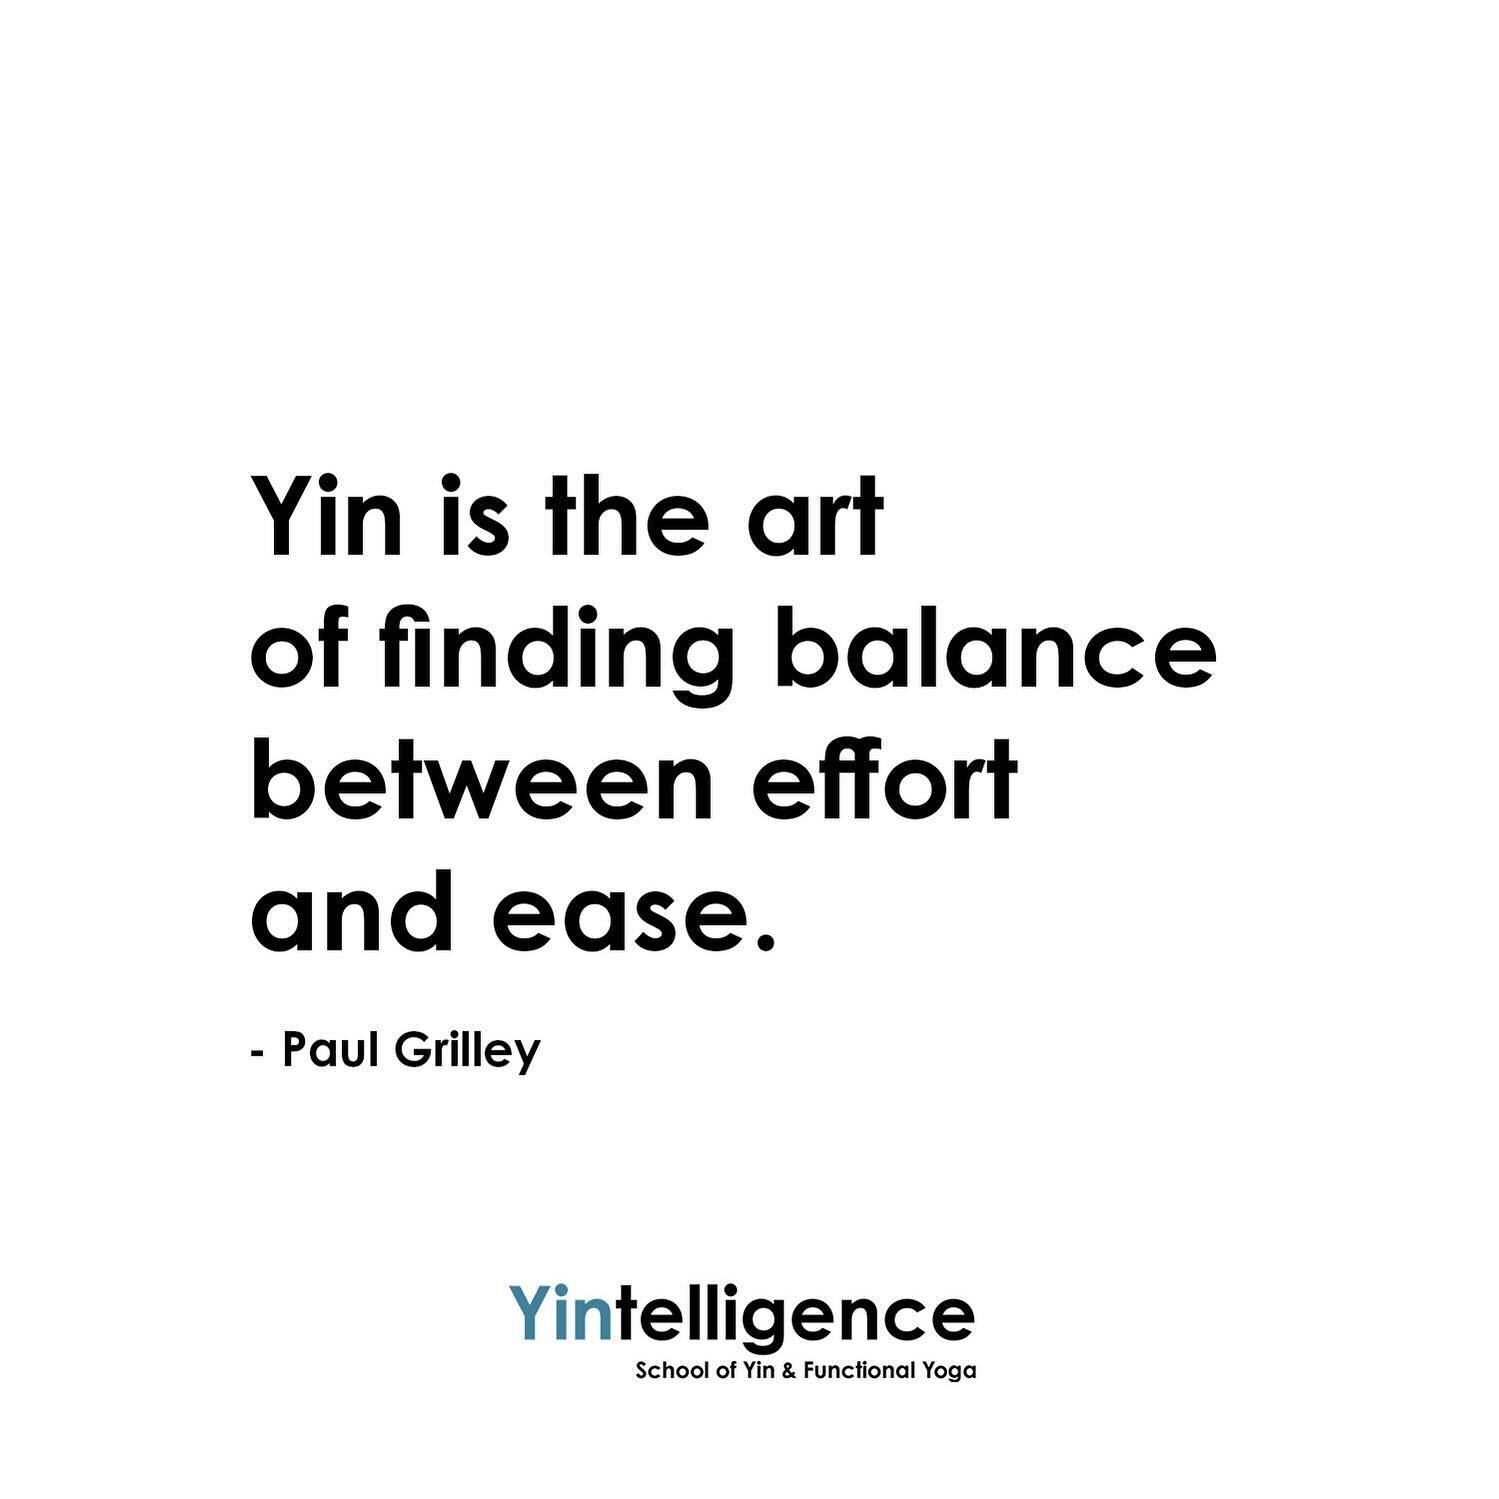 Yin-yang philosophy emphasizes how nature - macro and micro - is constantly seeking to harmonize opposing forces, to find that ultimate equilibrium.

Through our yoga practice we can nurture this equipoise within ourselves, by balancing effort and re